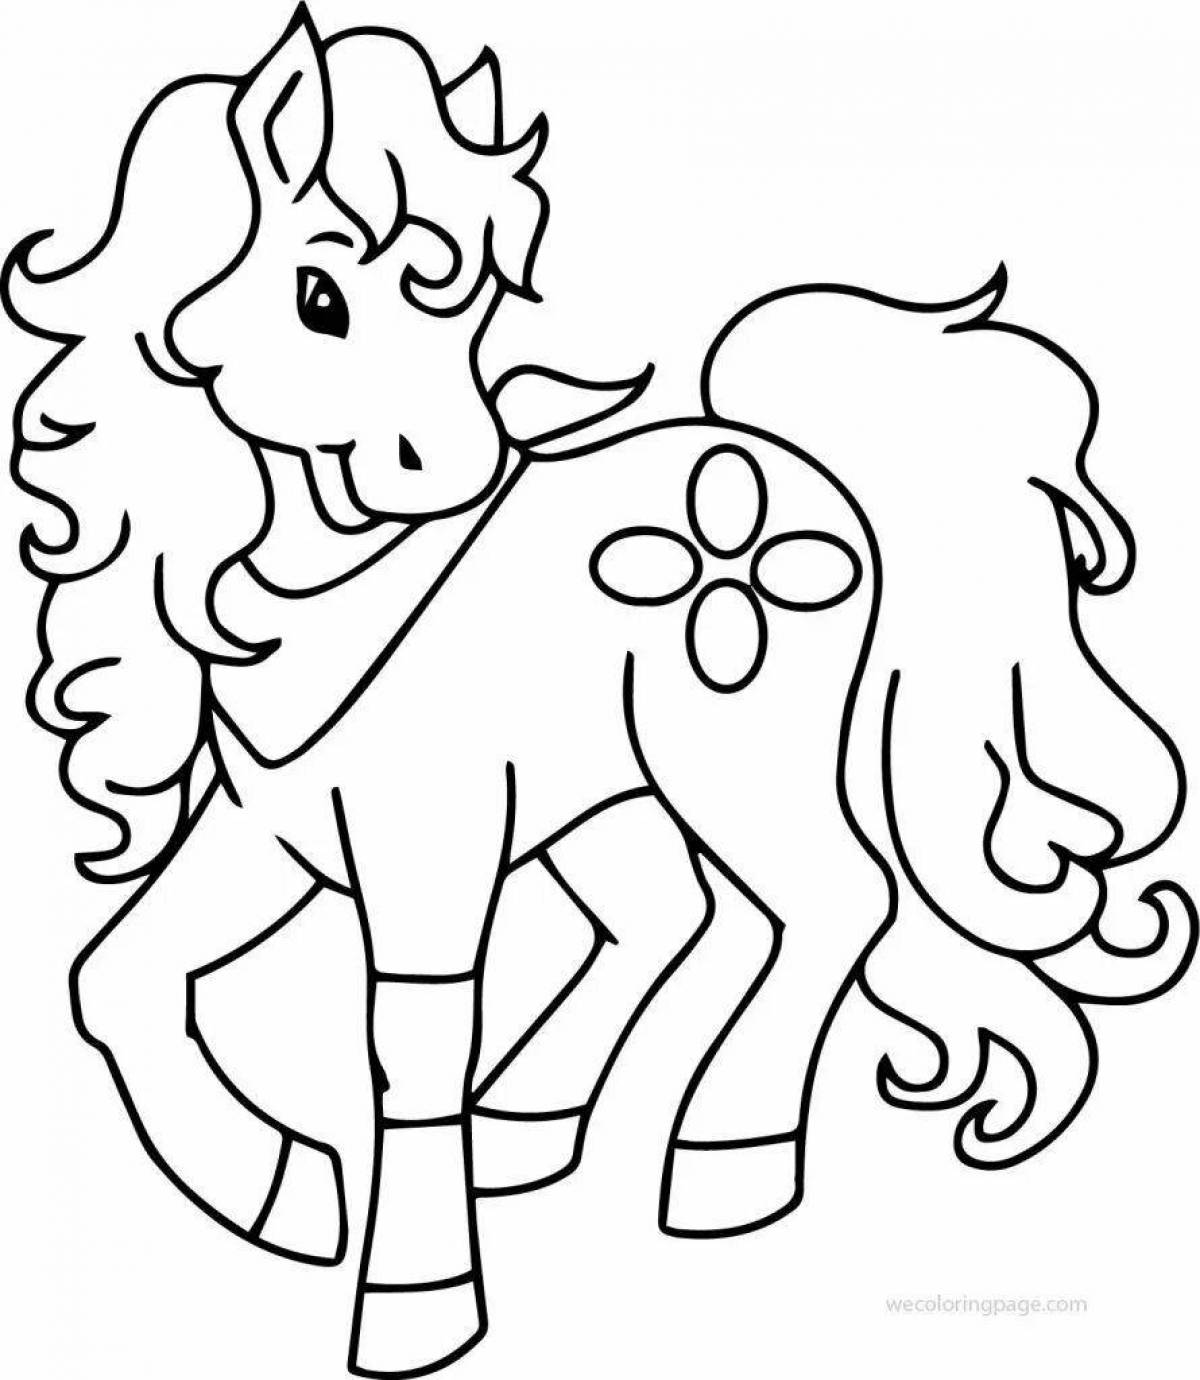 Luxury horse coloring book for children 4-5 years old